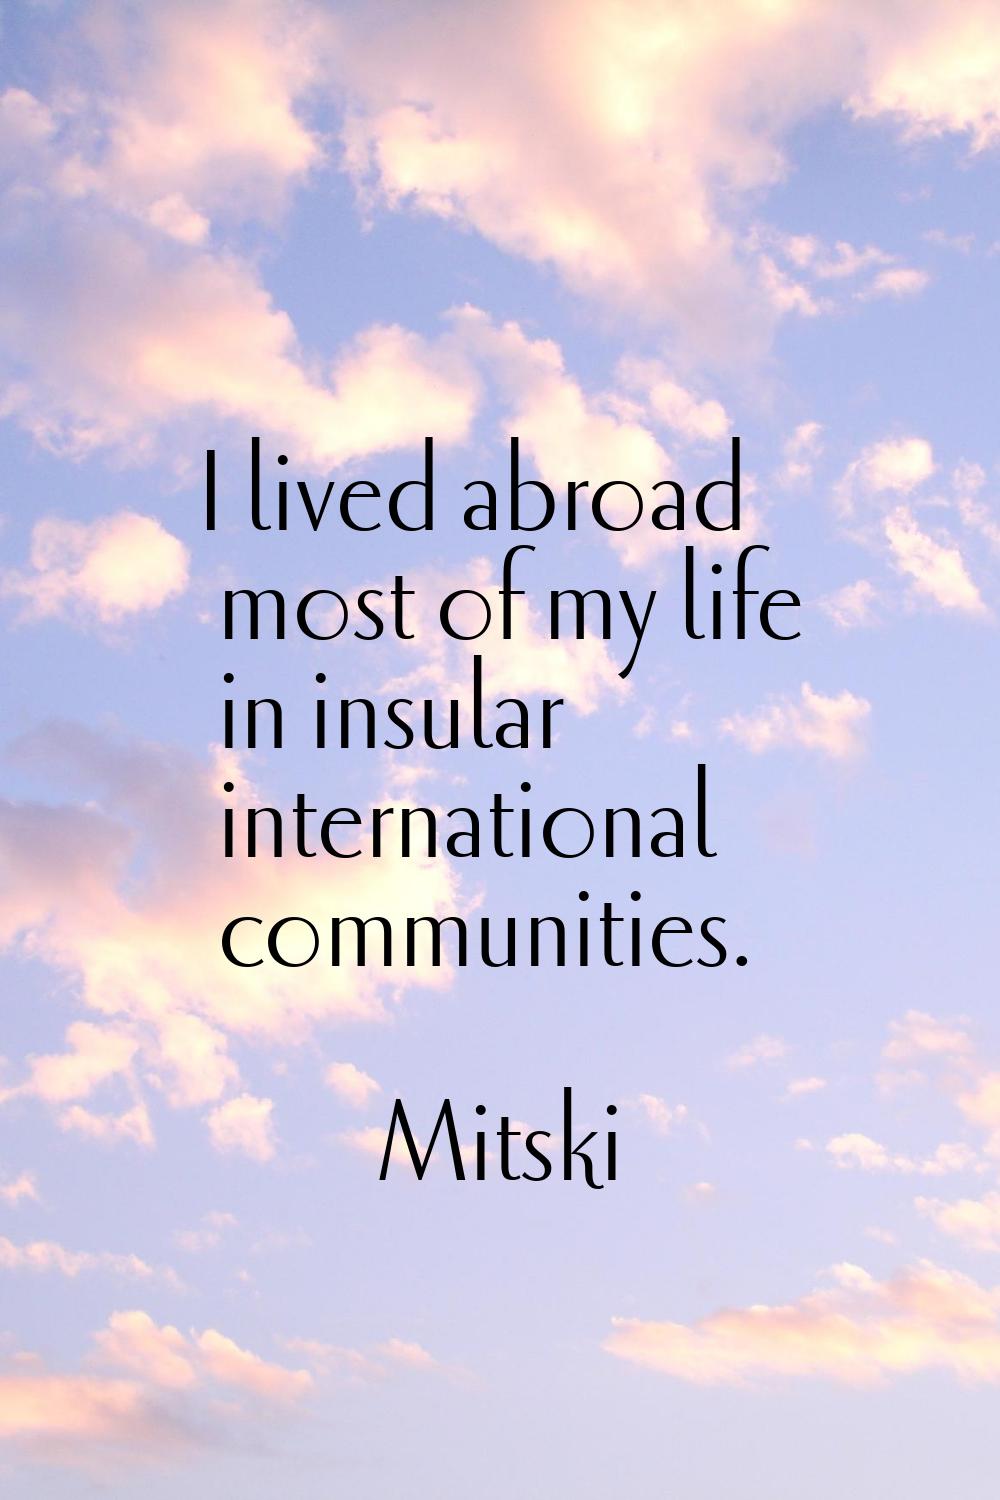 I lived abroad most of my life in insular international communities.